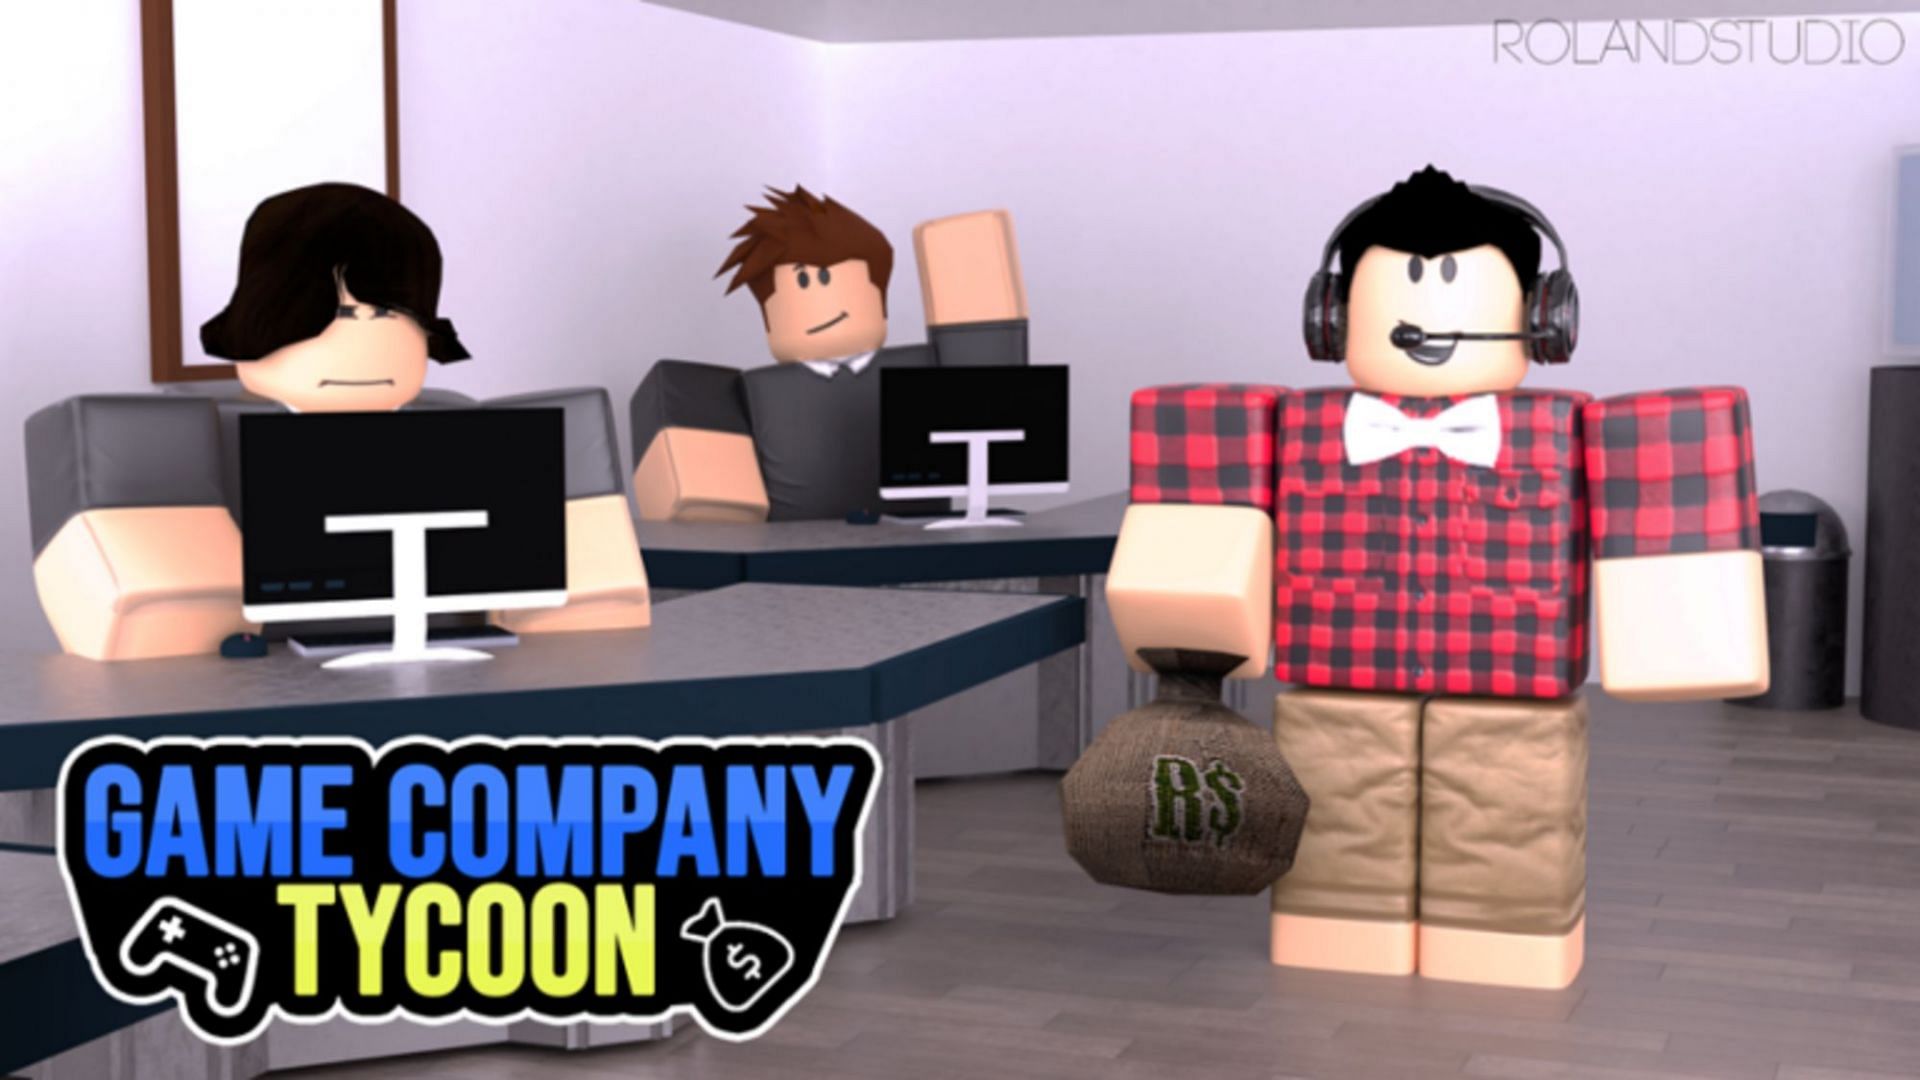 Get 1 Premium pet, 100 Gems, and 1 Legendary crate daily in Game Company Tycoon (Image via Roblox)